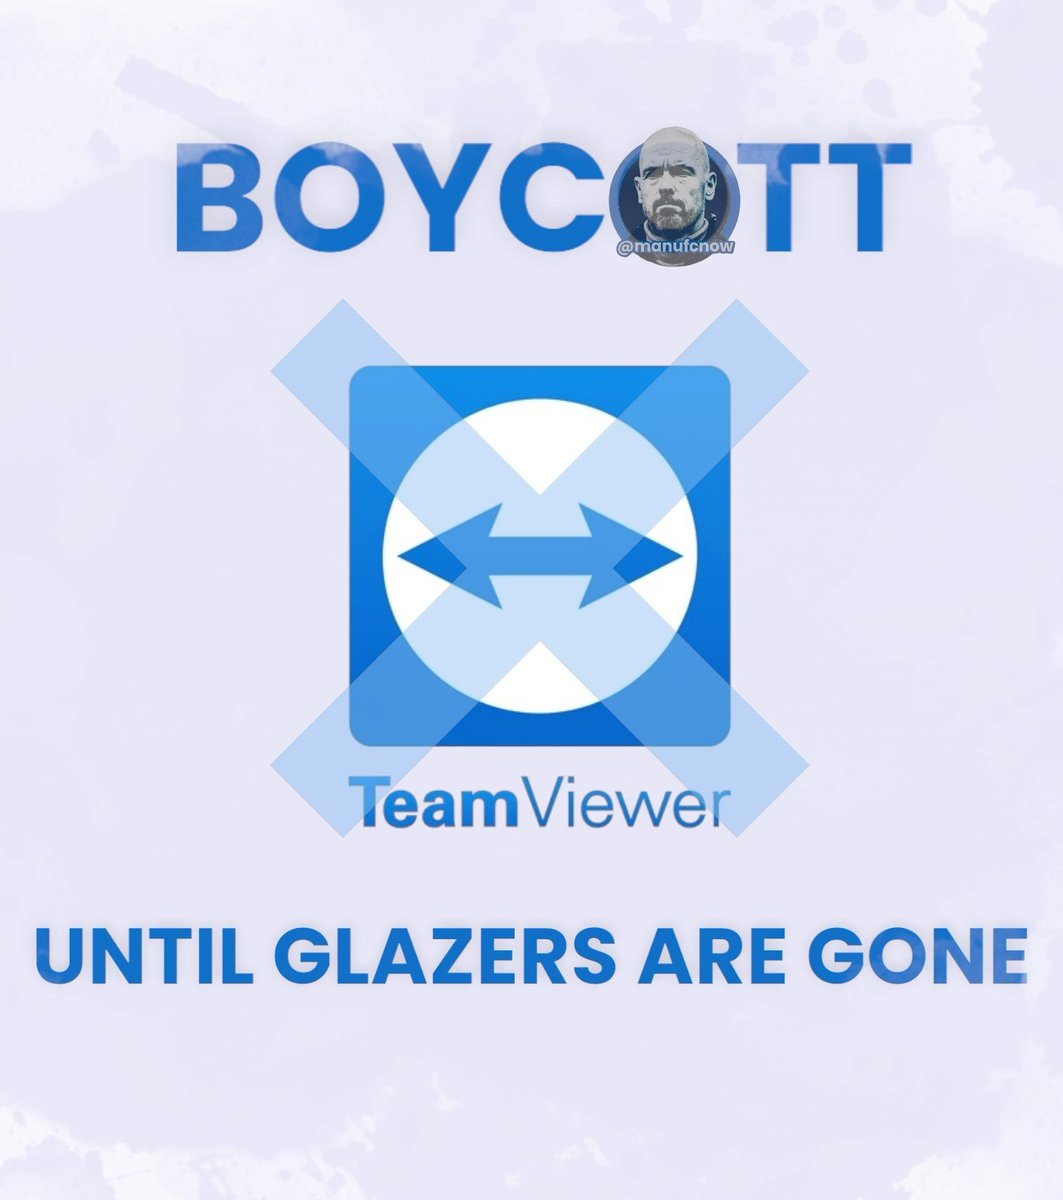 @TeamViewer Flexible - 'we're been bent over by the Glazer's'

Scalable - 'yep, their standing on us to scale the wall themselves'

Improved Stability - 'Not while we're in bed with Avi and Joel'

More Permissions - 'Glazer daddies say no'

The #TeamViewer Moto!!

#BoycottTeamViewer